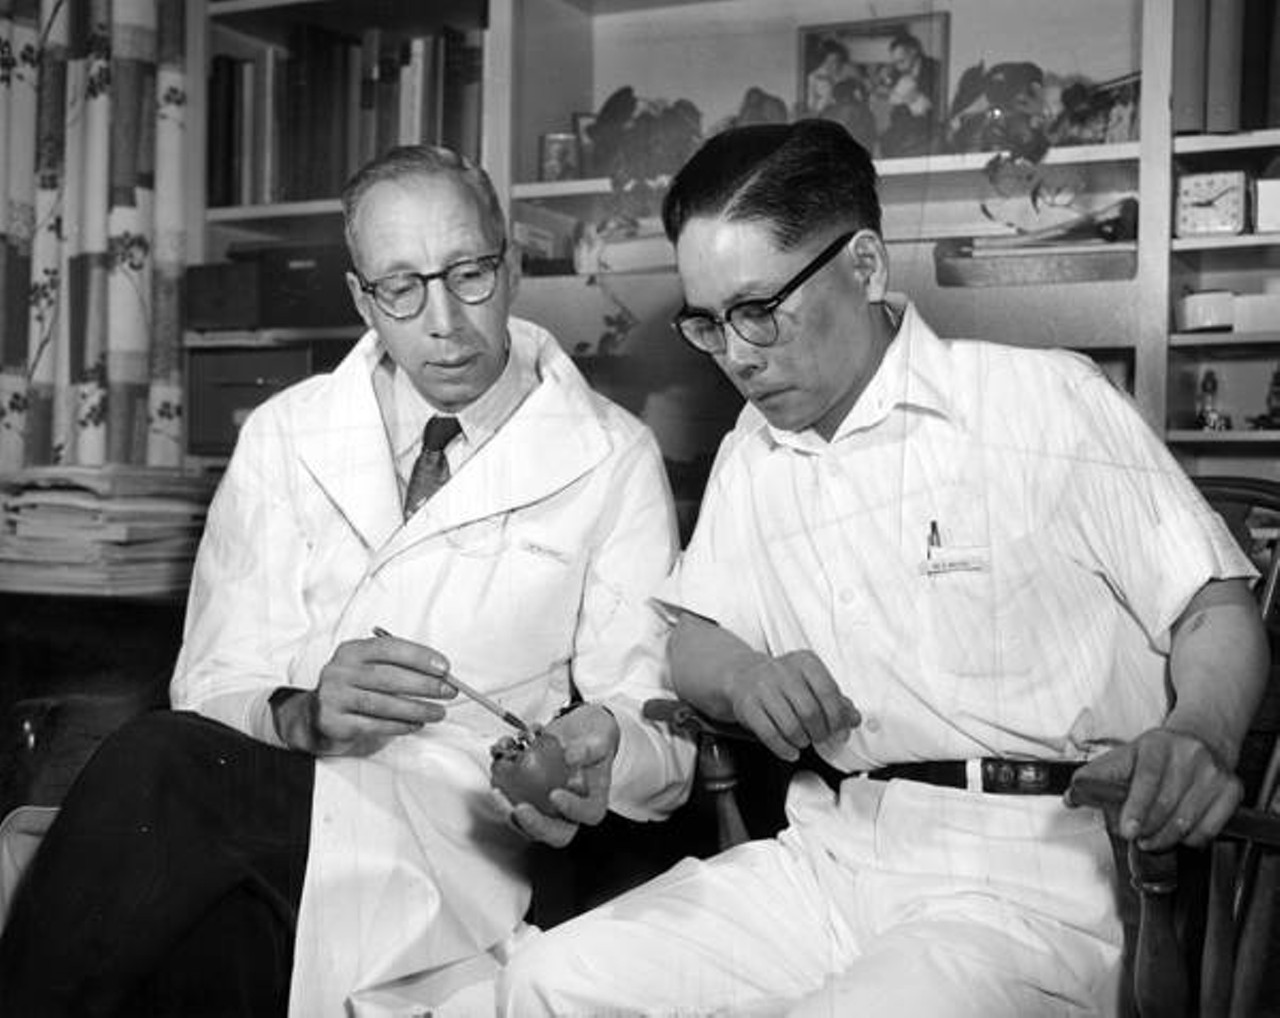  Drs. Willem Kolff and Tetsuzo Akitsu Examine an Artificial Heart Developed at the Cleveland Clinic, 1958 